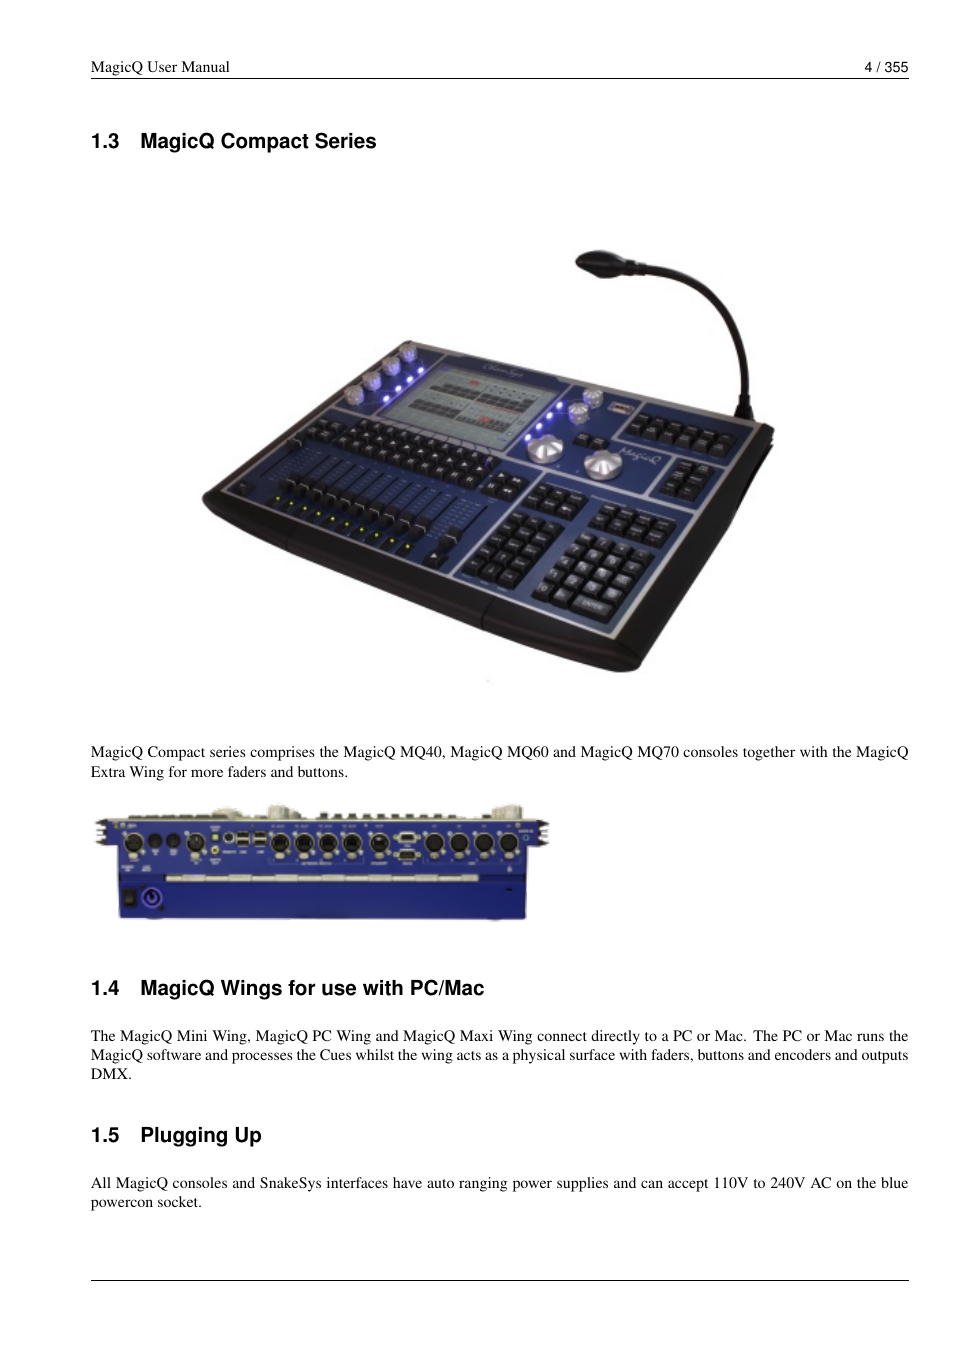 Magicq compact series, Magicq wings for use with pc/mac, Plugging up | ChamSys  MagicQ User Manual User Manual | Page 33 / 384